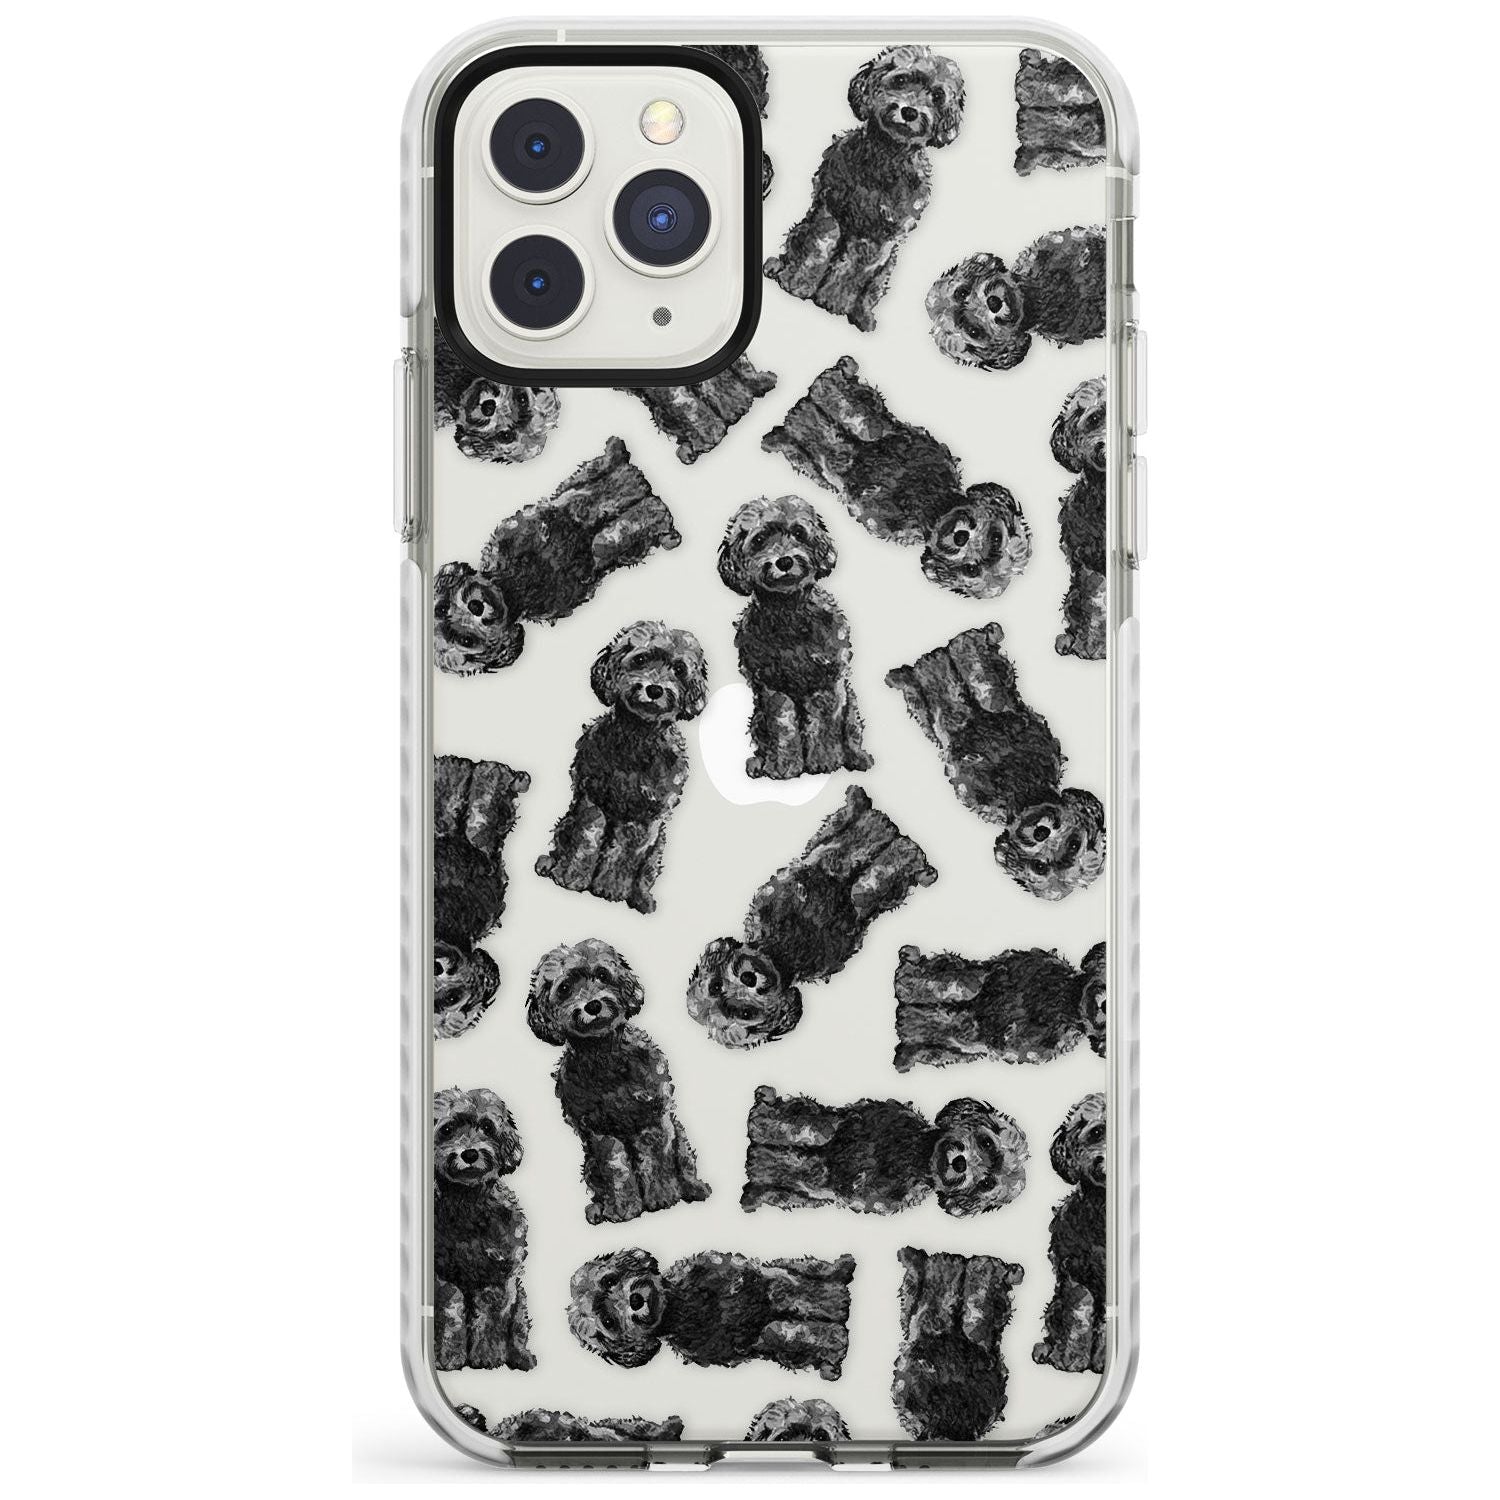 Cockapoo (Black) Watercolour Dog Pattern Impact Phone Case for iPhone 11 Pro Max